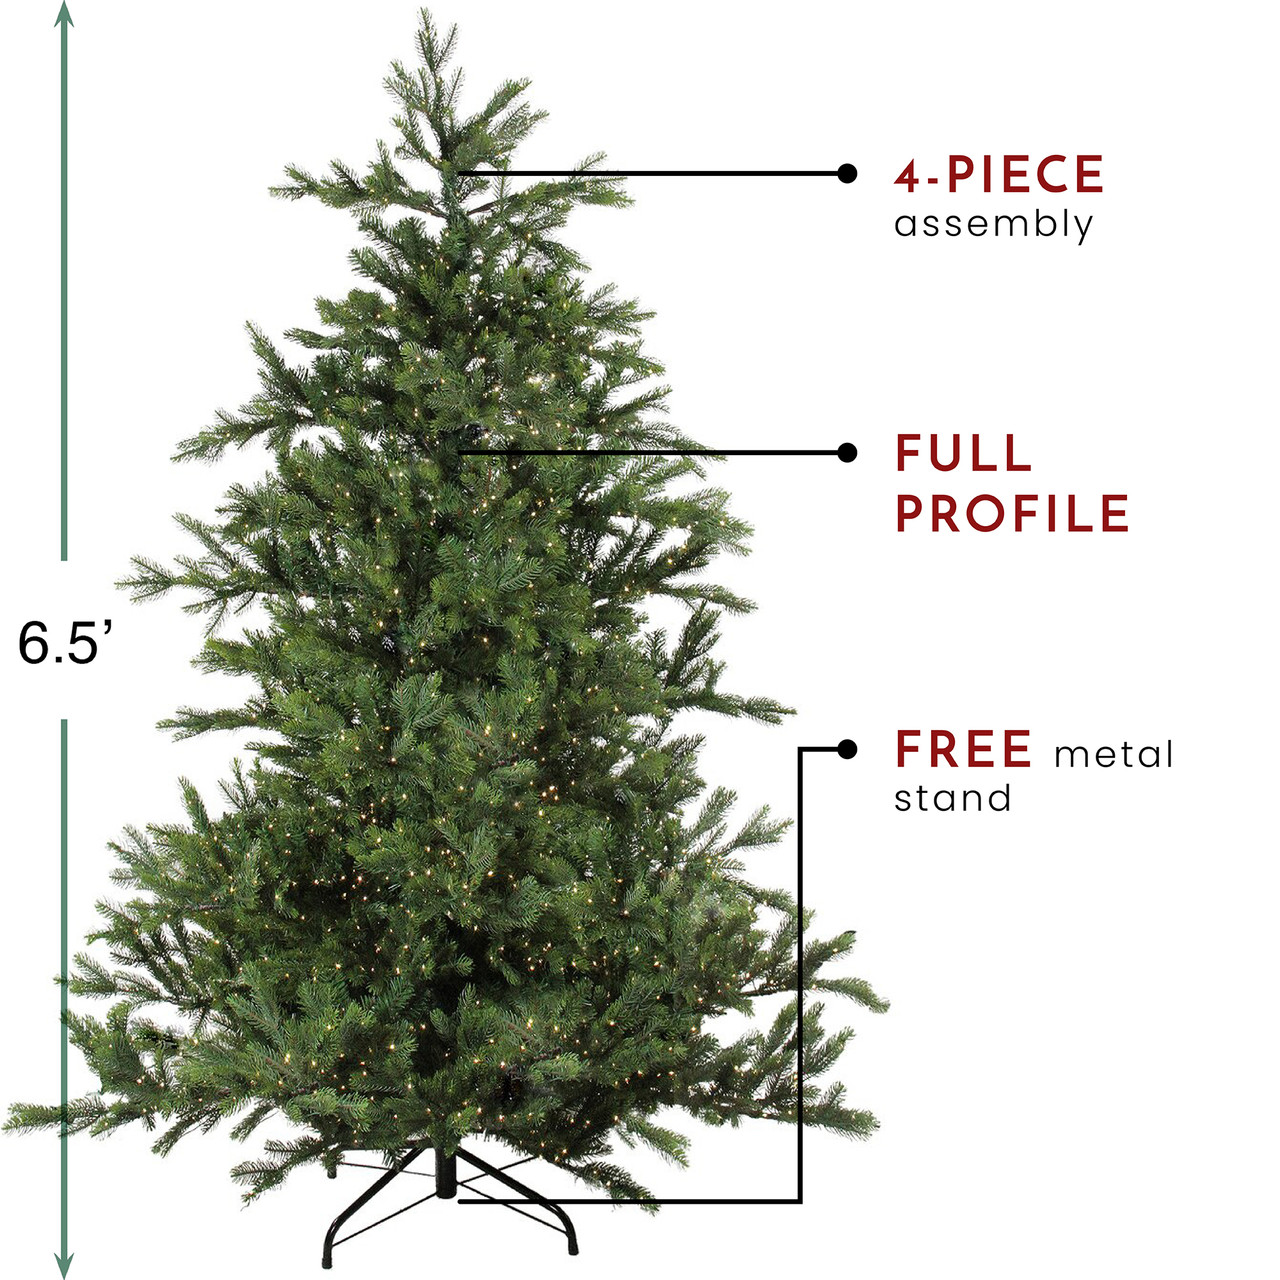 6.5' Oregon Fir Artificial Christmas Tree with 1350 Warm White